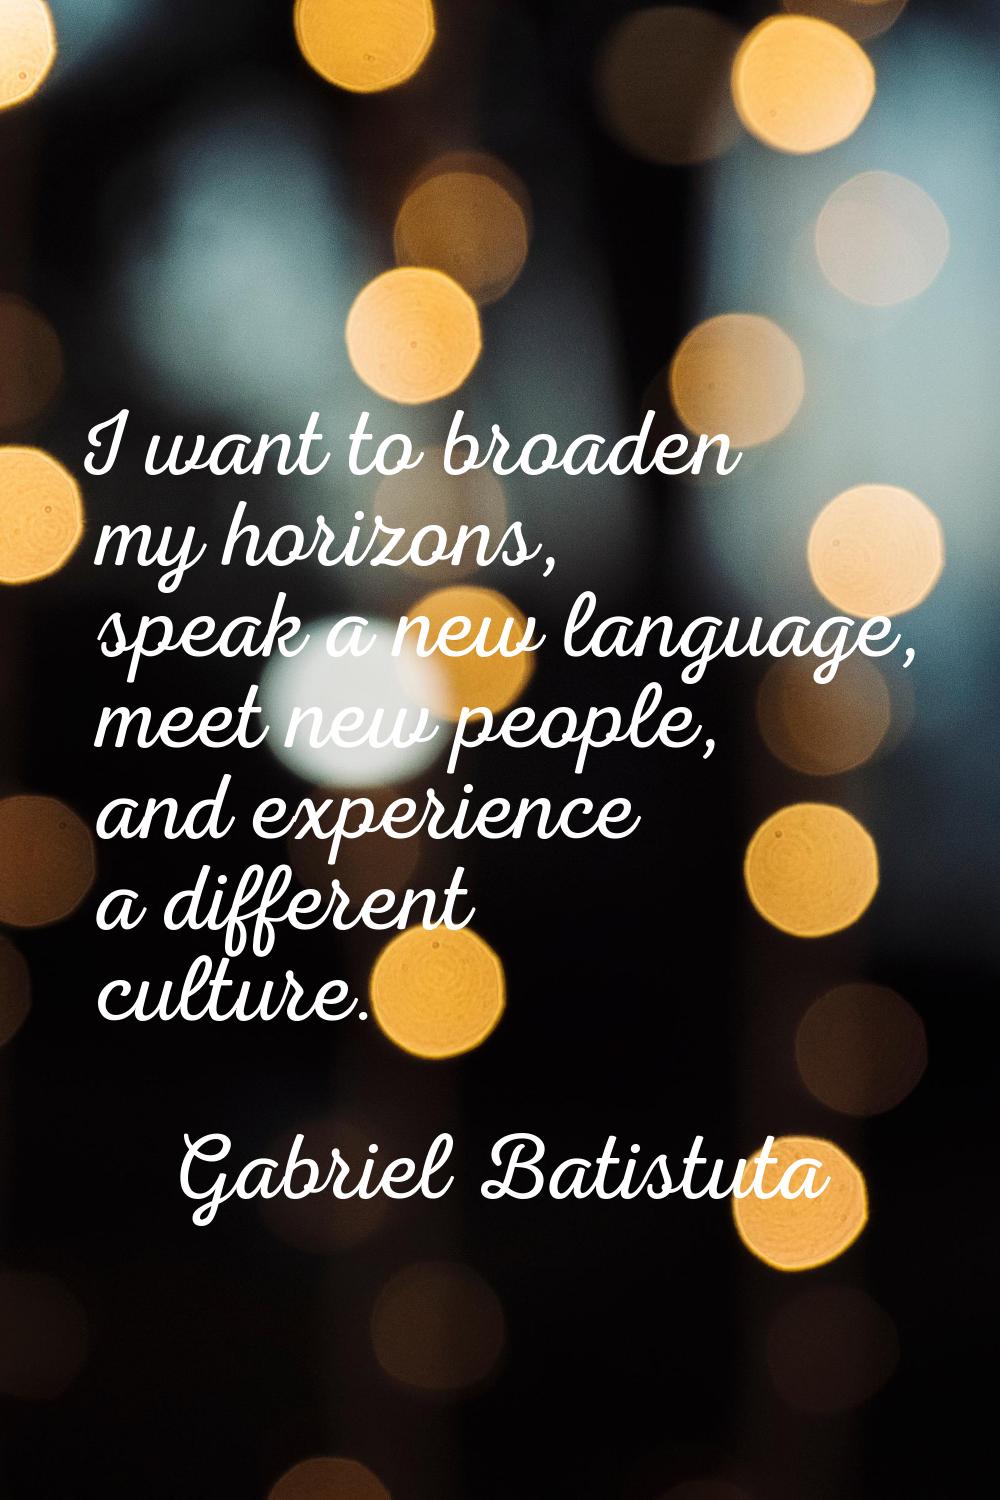 I want to broaden my horizons, speak a new language, meet new people, and experience a different cu